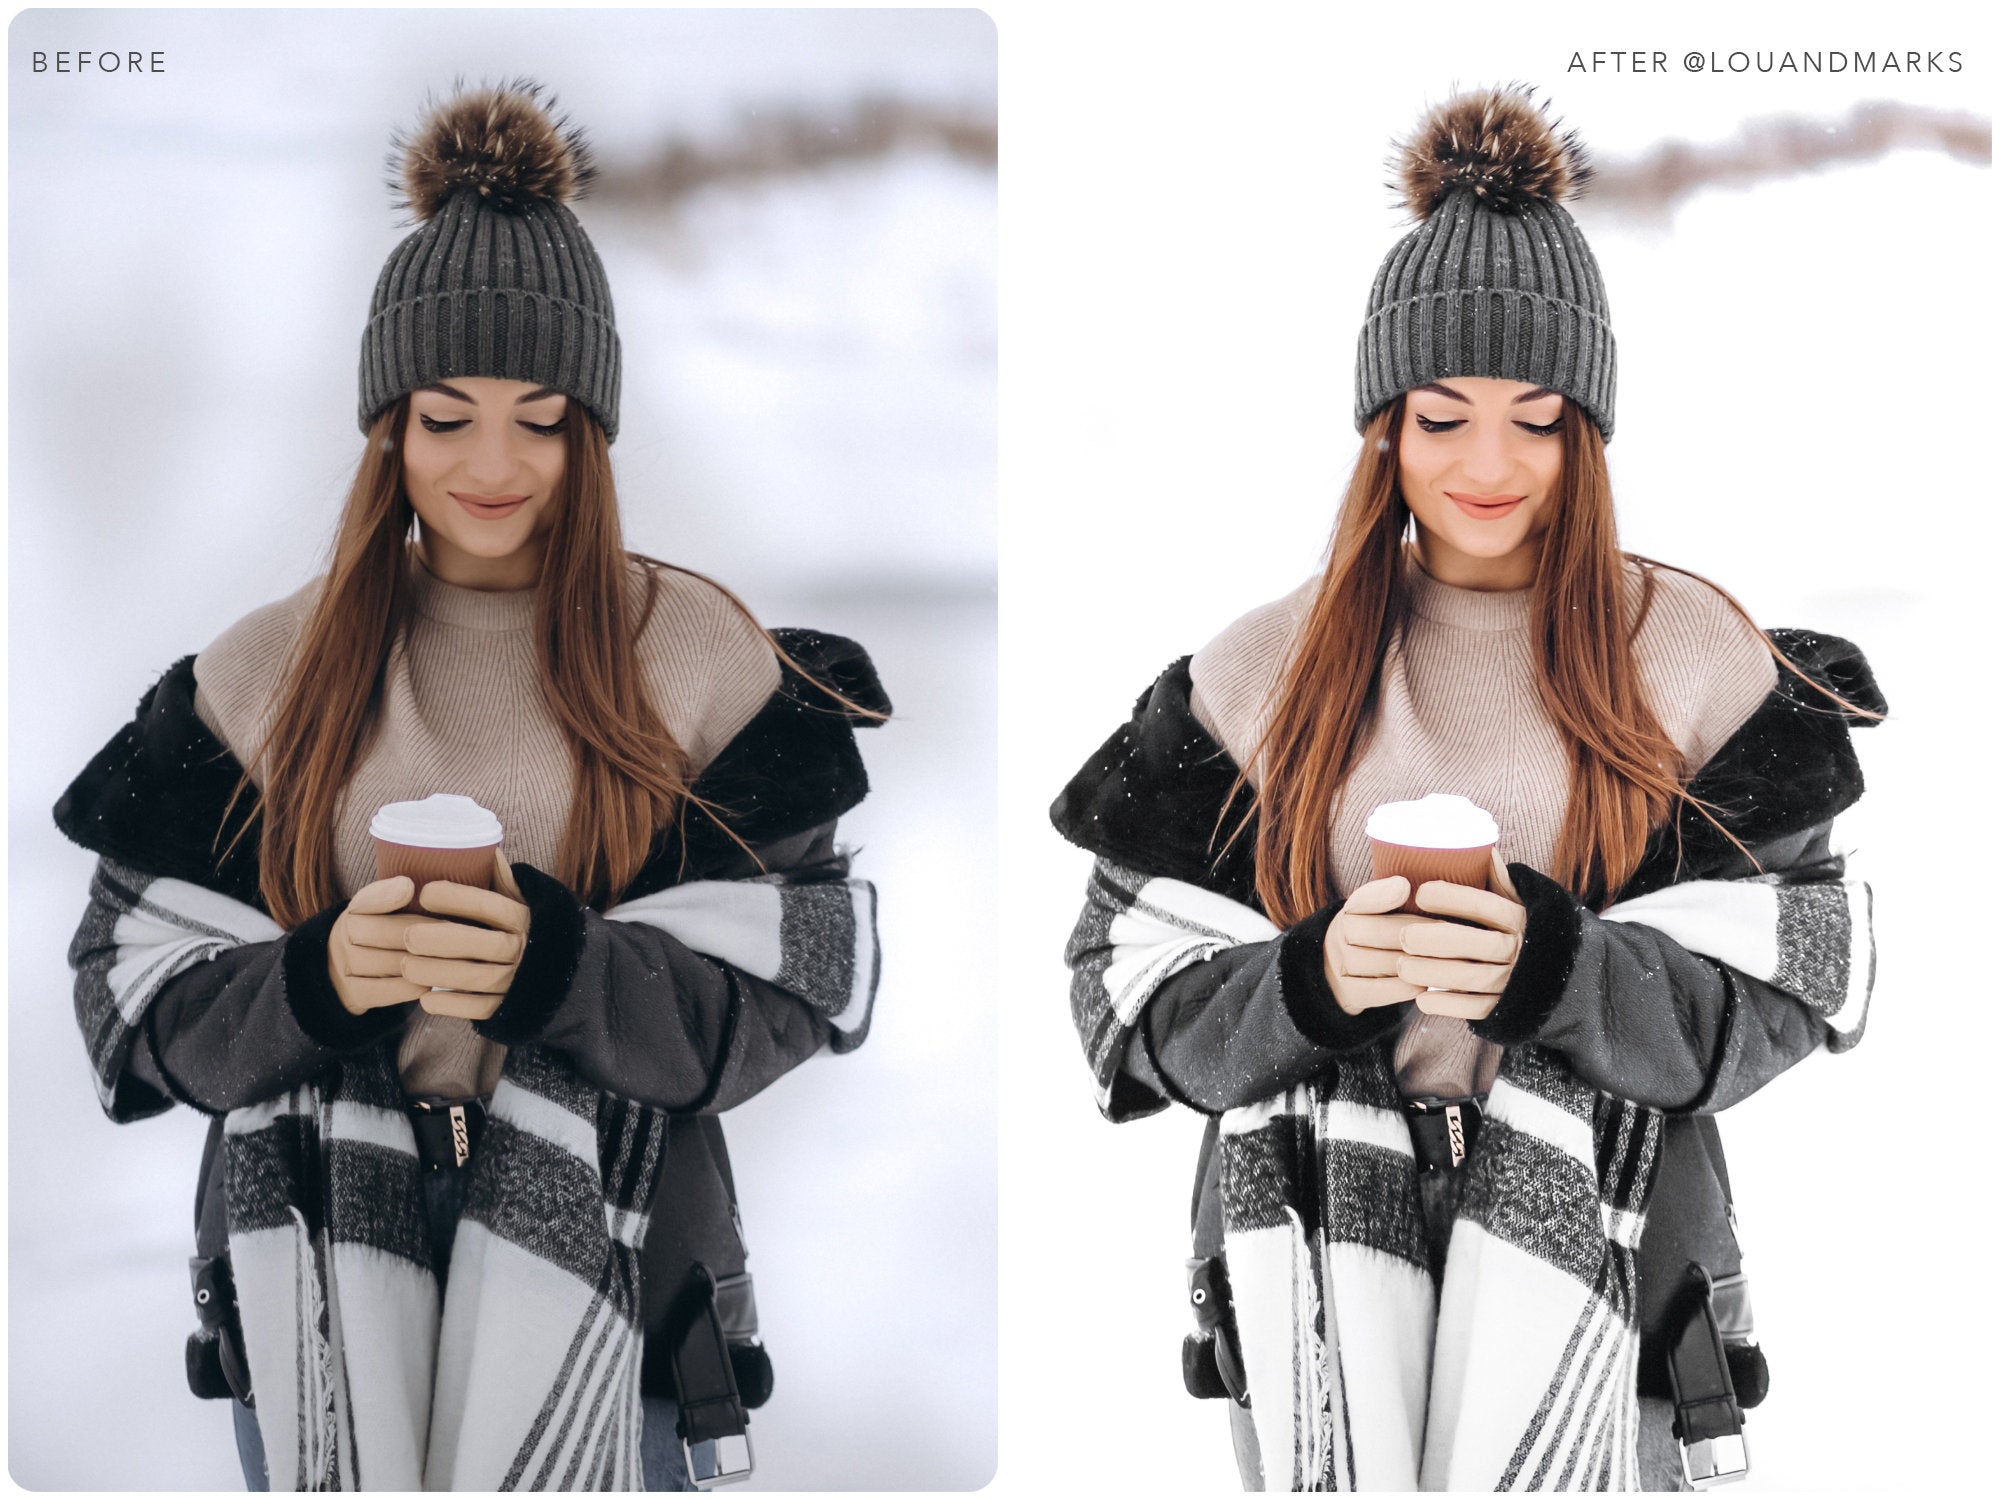 15 Winter Mobile Lightroom Presets White, Clean Photo Editing Filter for Lifestyle Blogger, Instagram Influencer Outdoor Preset